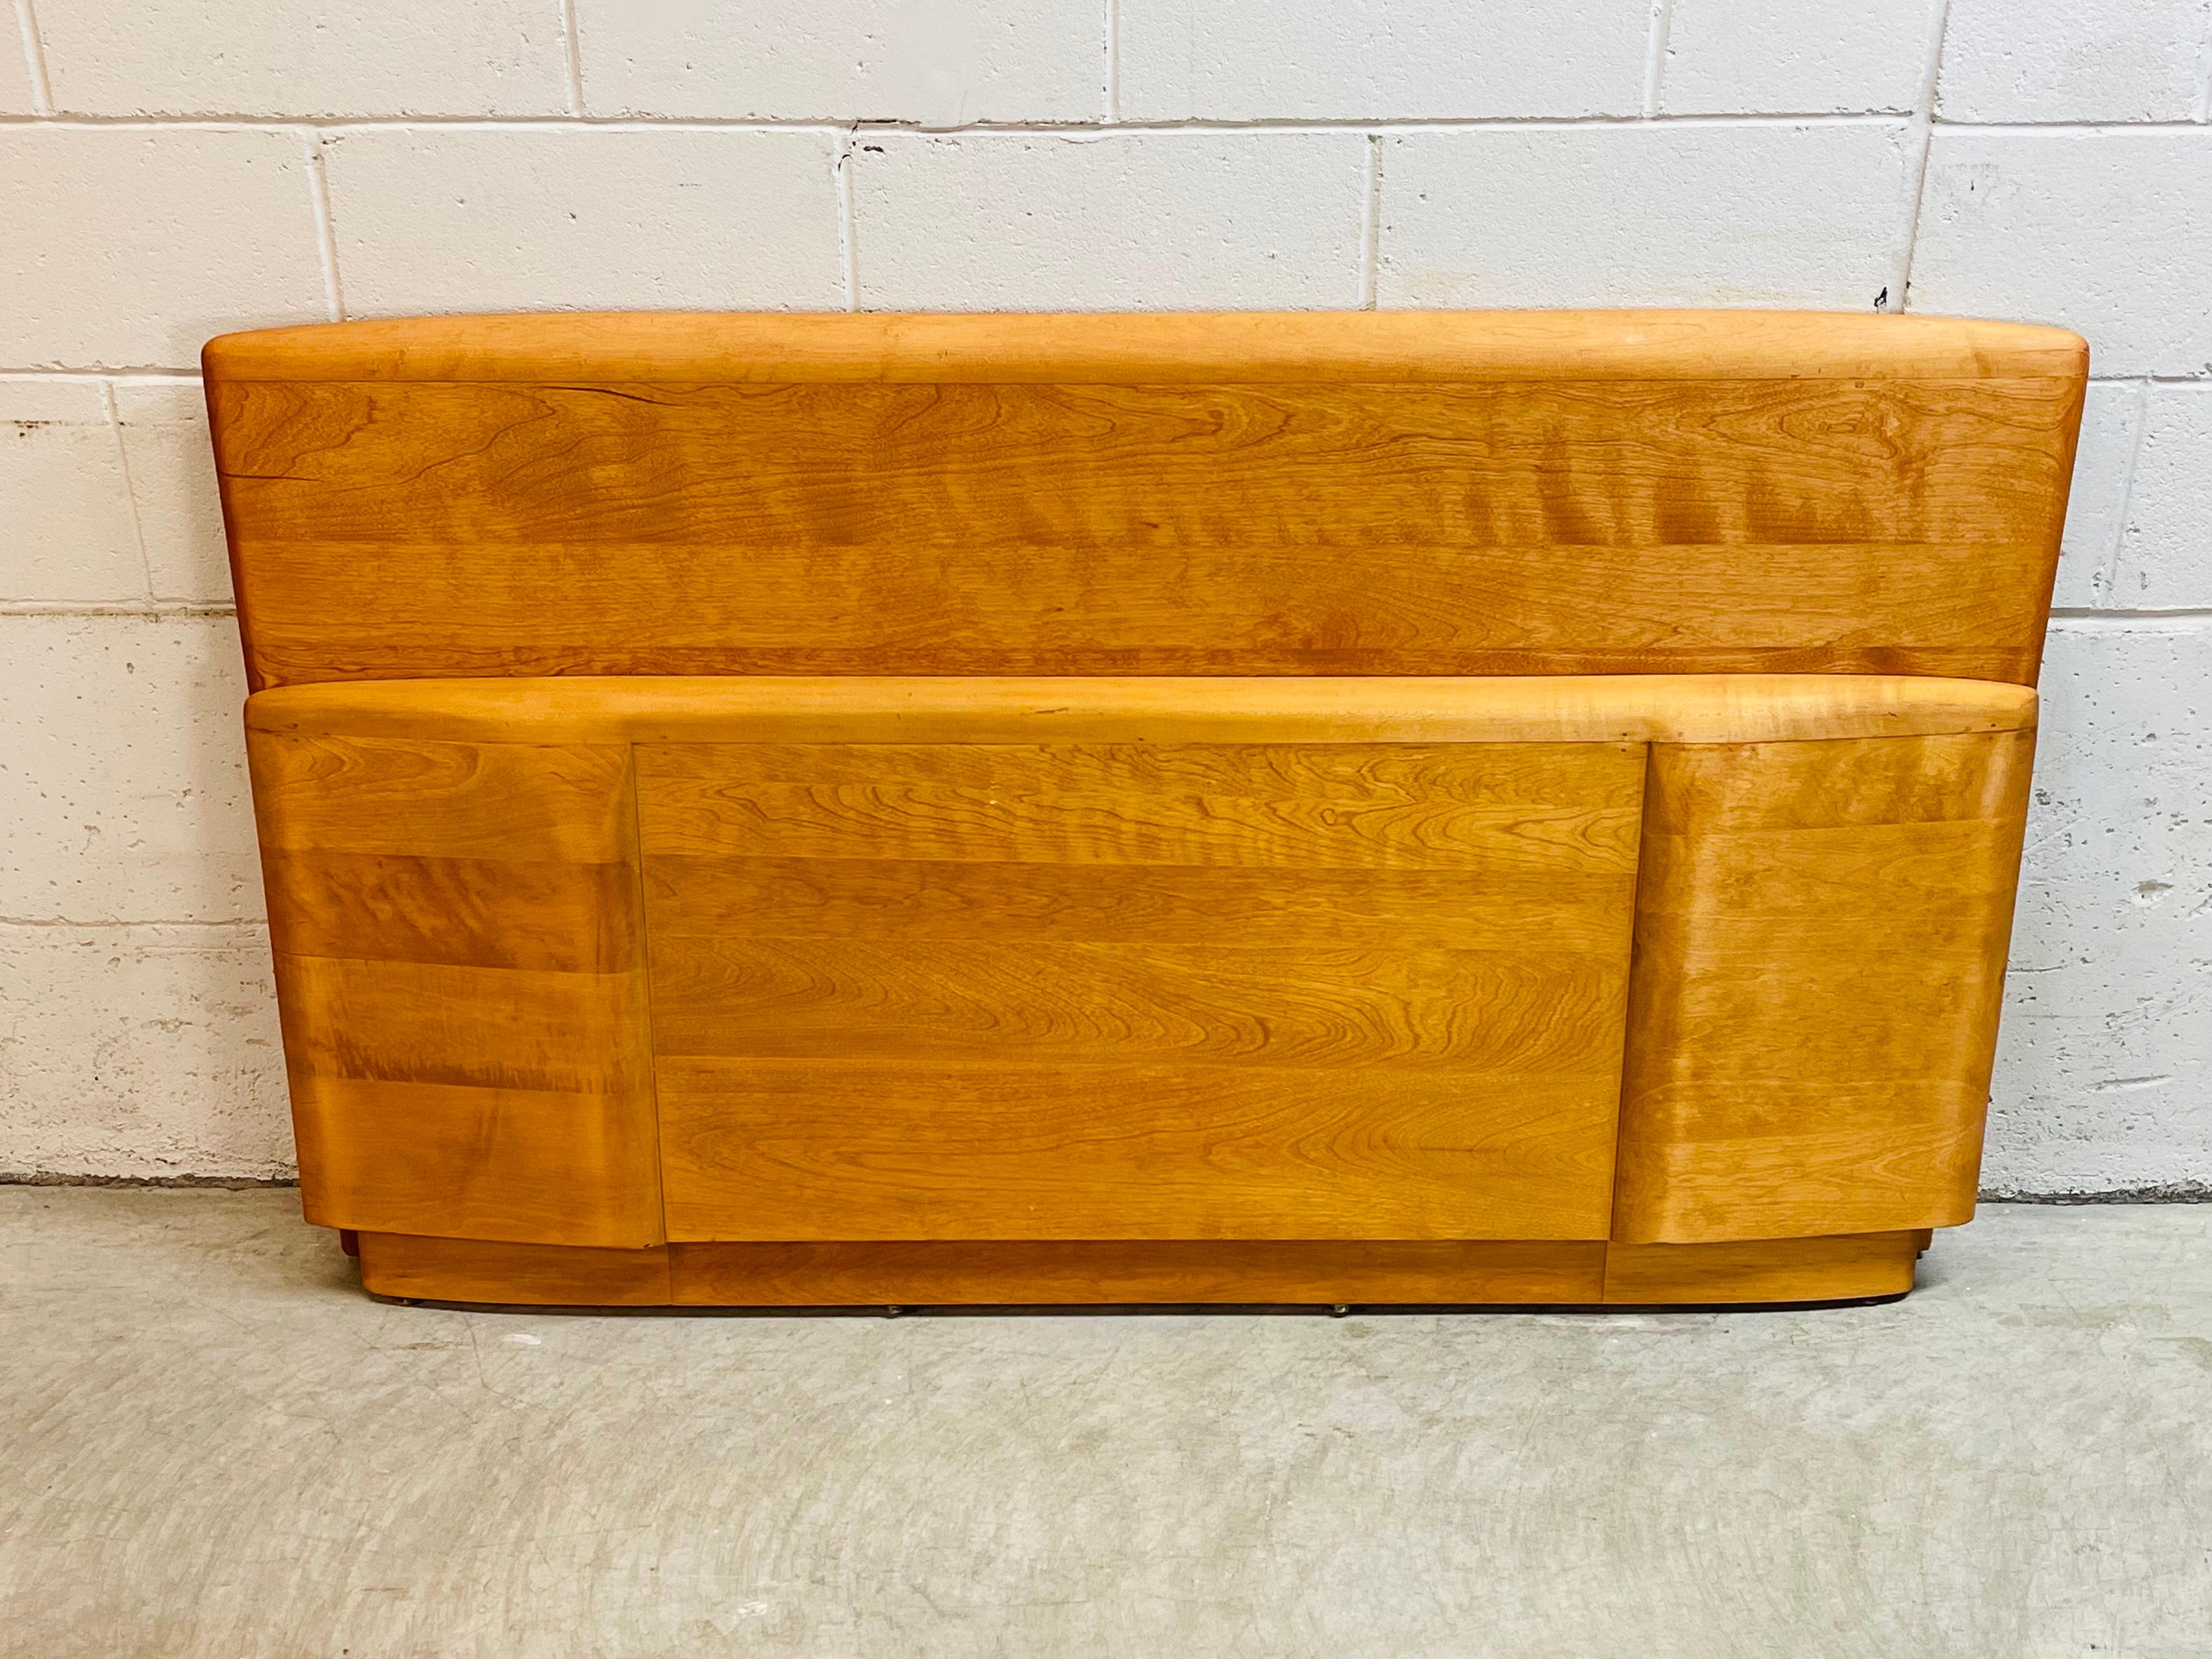 Vintage 1950s Heywood Wakefield maple wood full/double bed head and foot board set. The set does not include the rails. The foot board measures 58”L x 23”H. Both are marked and in refinished condition.